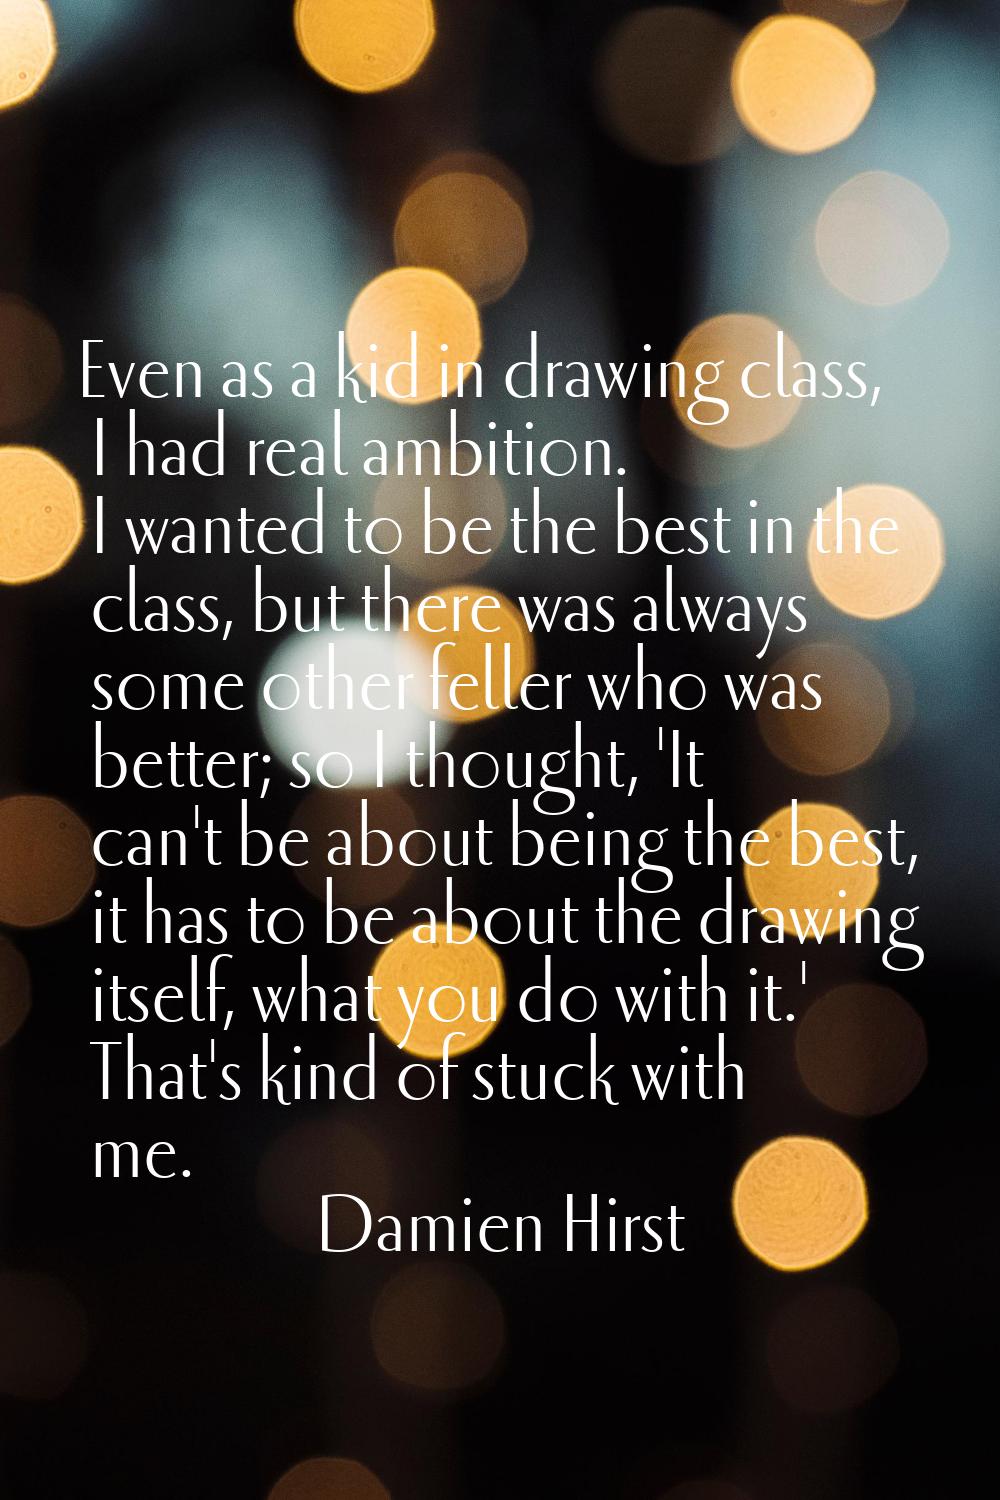 Even as a kid in drawing class, I had real ambition. I wanted to be the best in the class, but ther